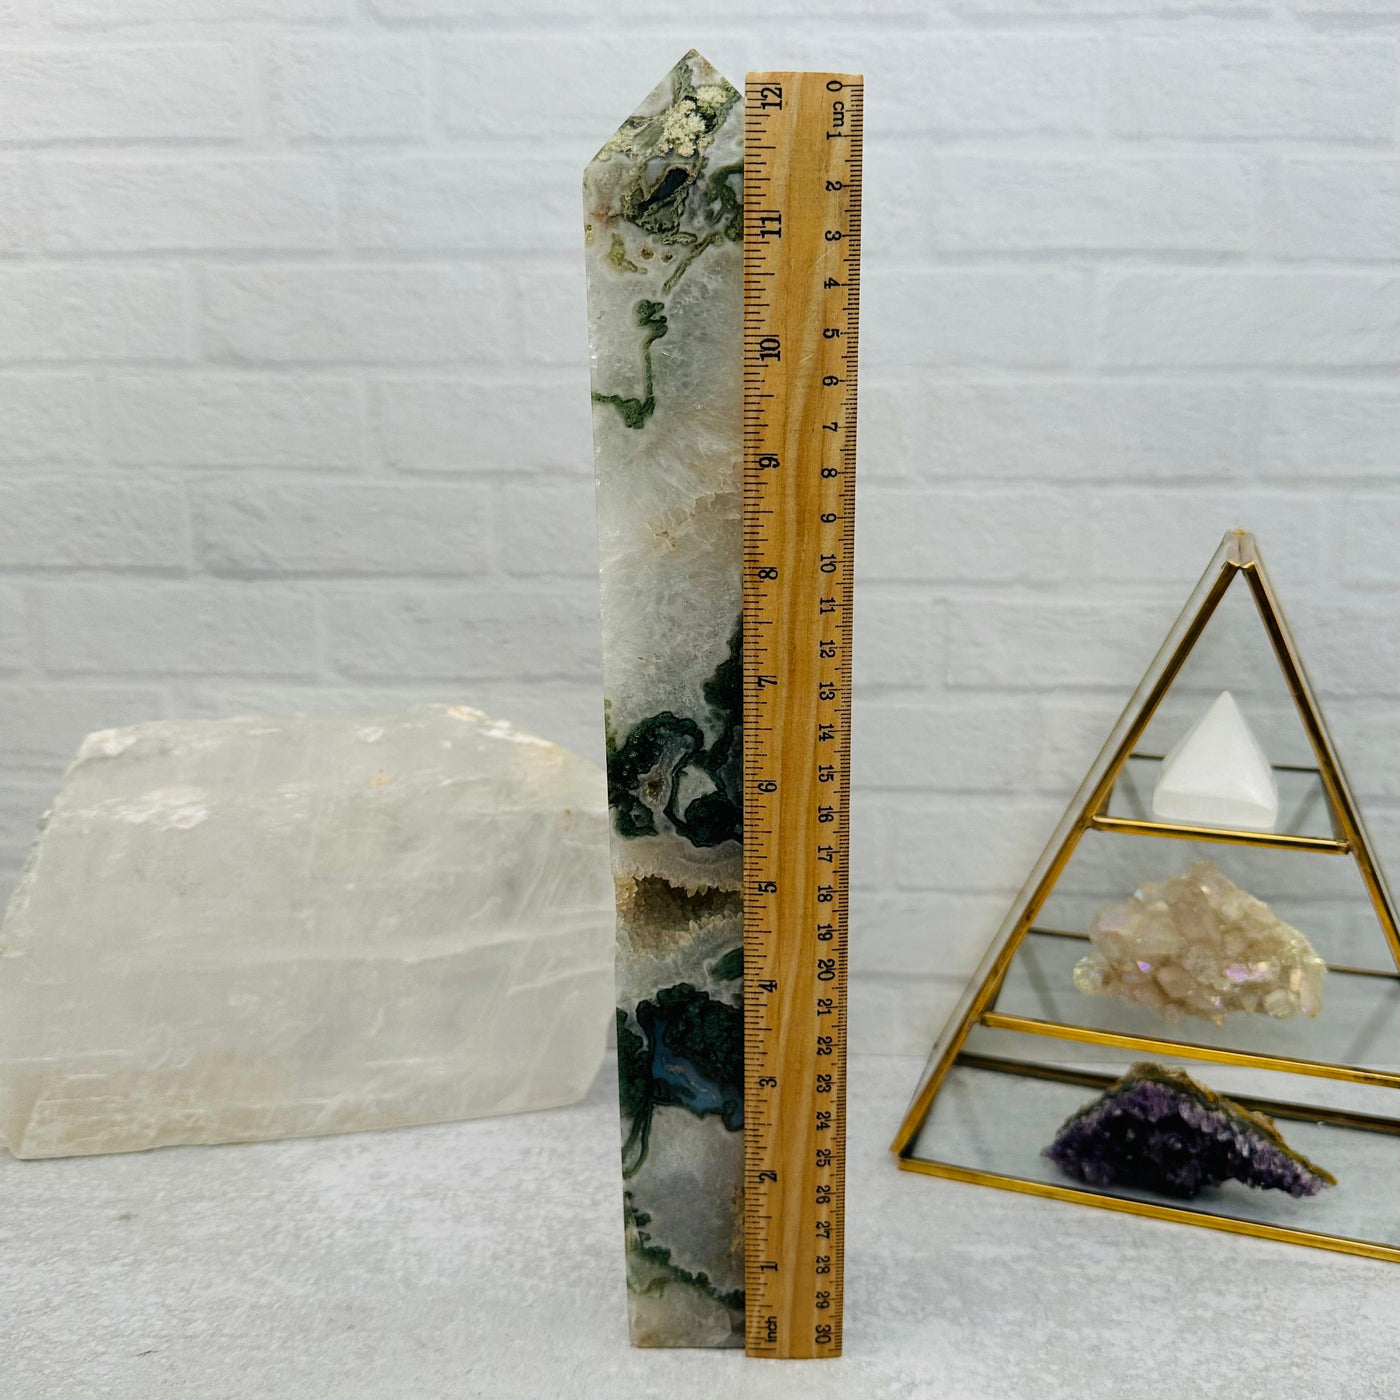 Moss Agate Polished Obelisk next to a ruler for size reference 